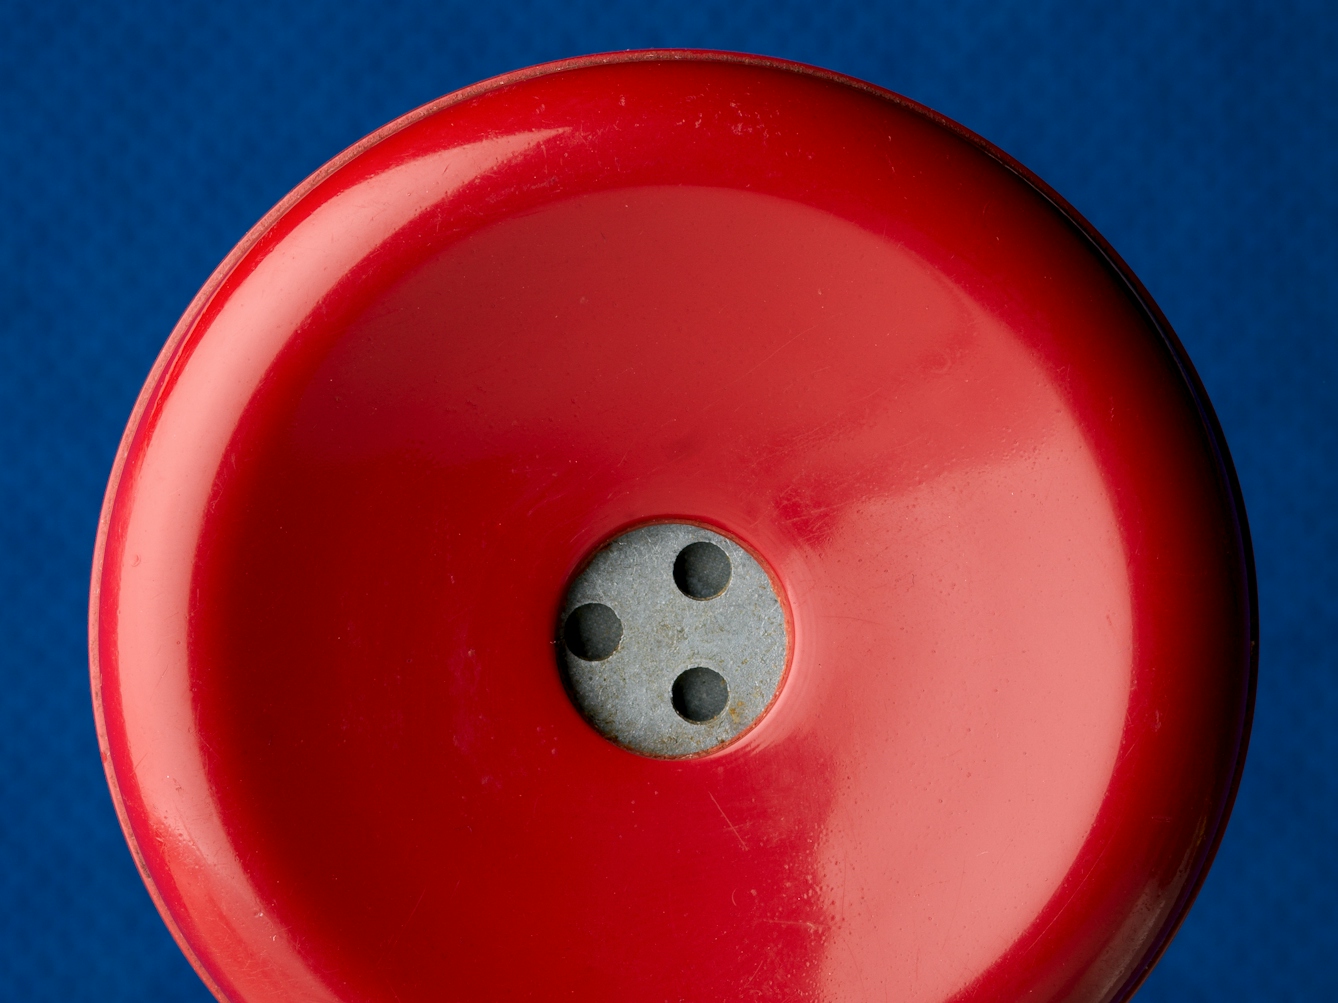 Photograph of a close up of an old red rotary telephone receiver's earpiece, against a blue felt background. 